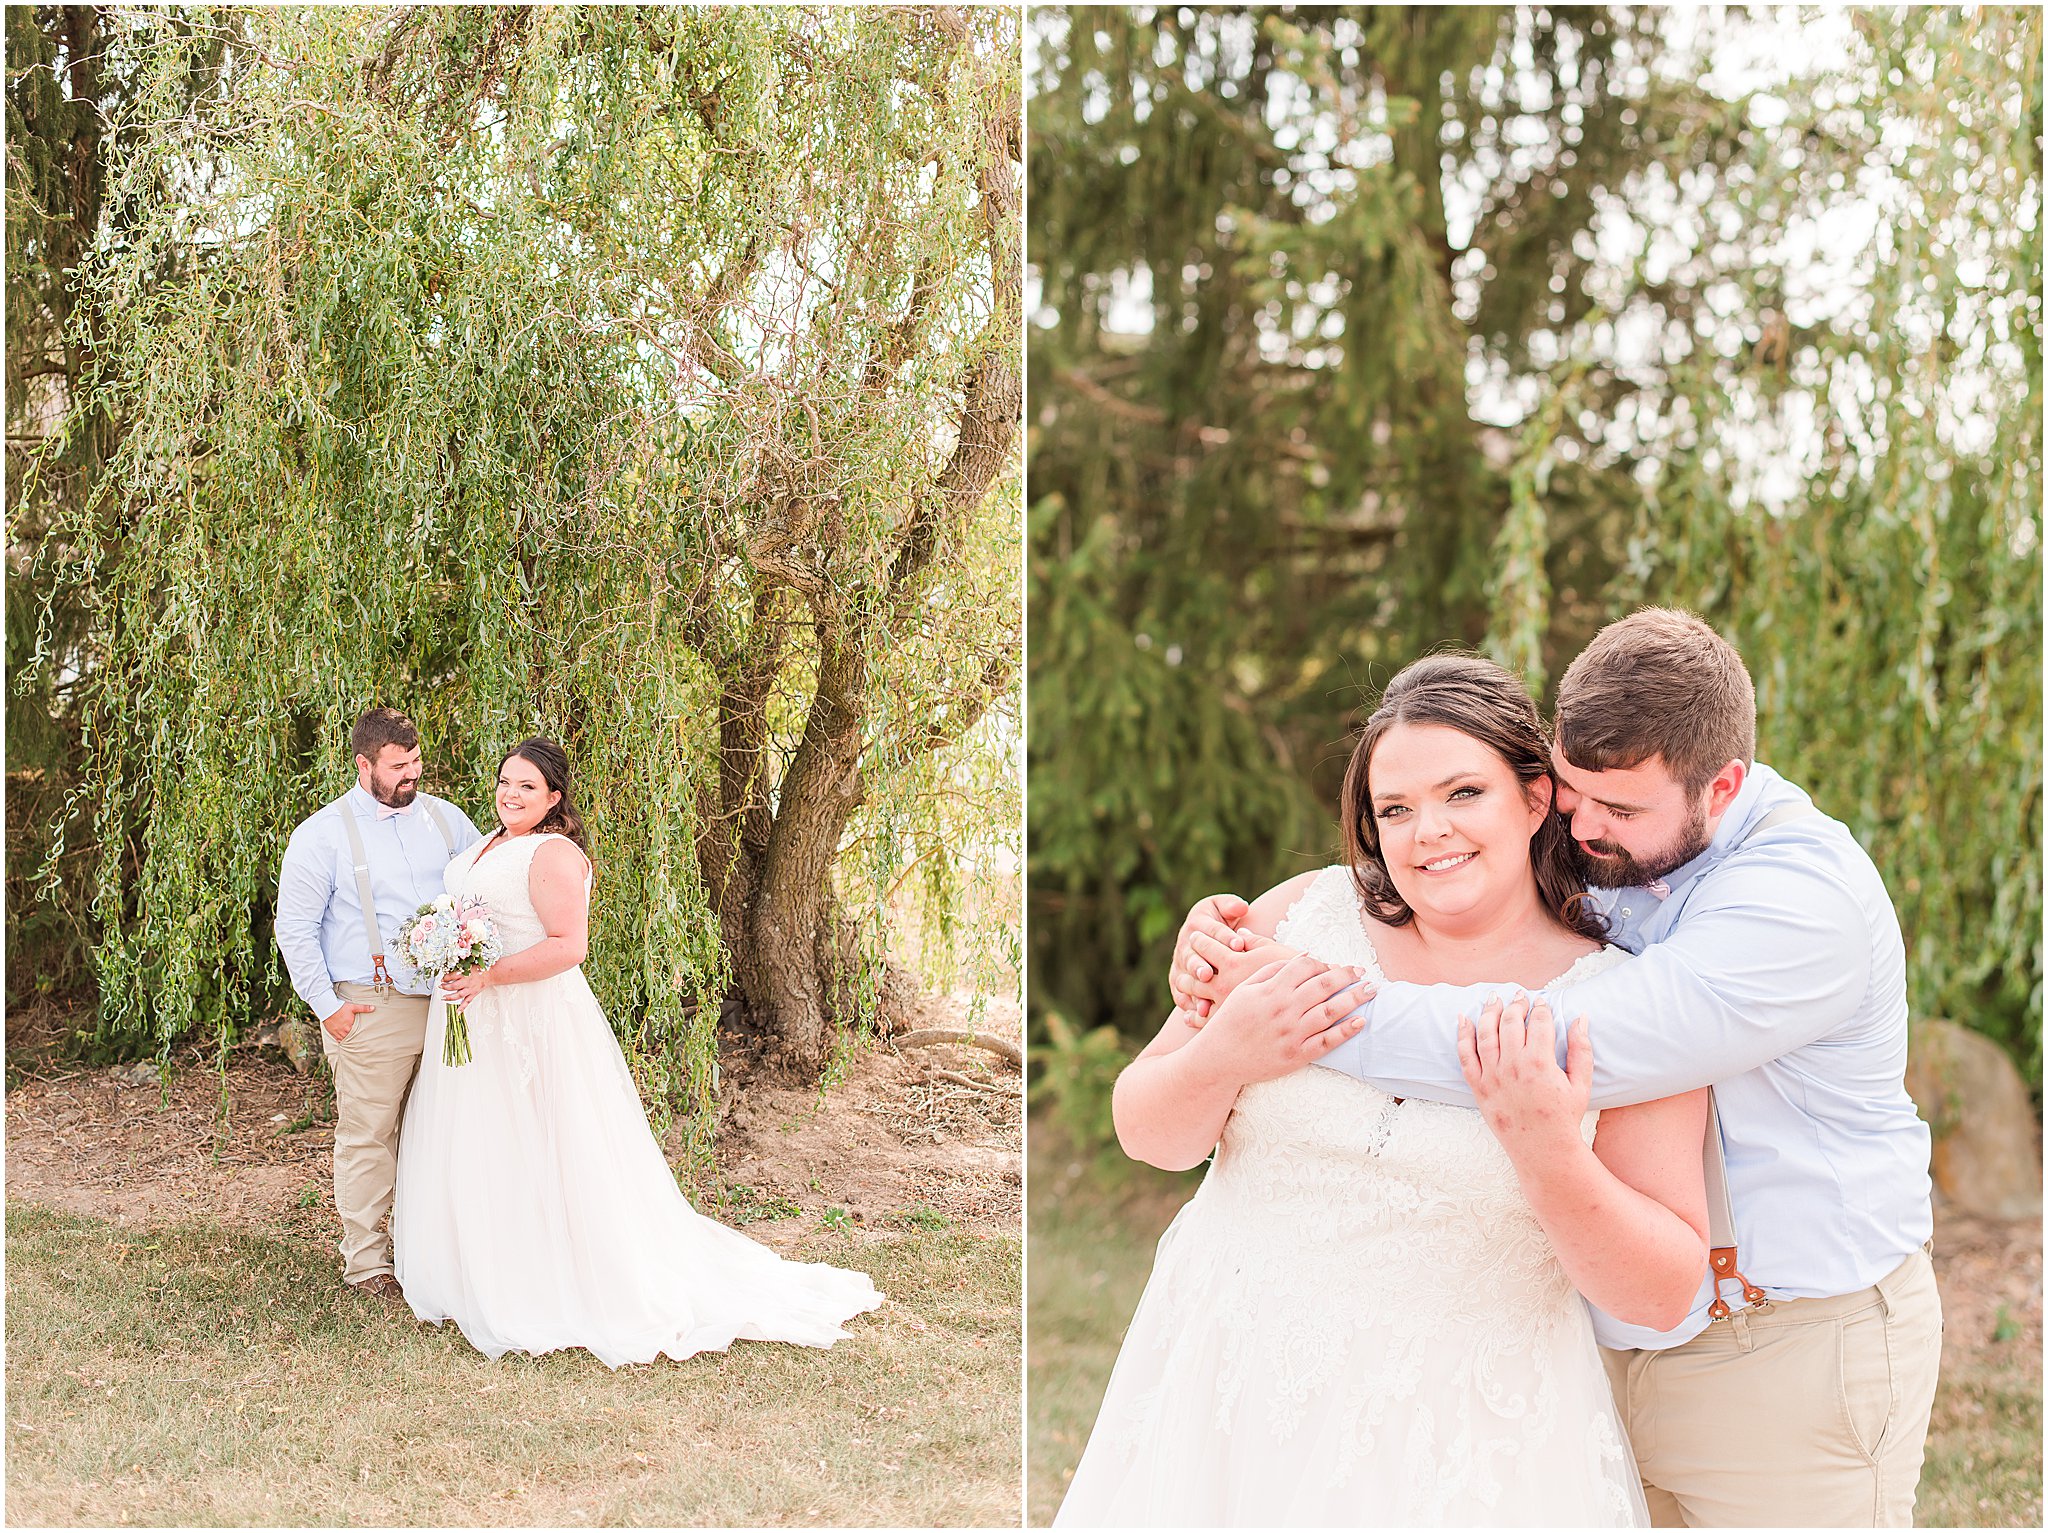 Groom smiling towards bride in front of willow tree at Cornerstone Hall in Salem, IN